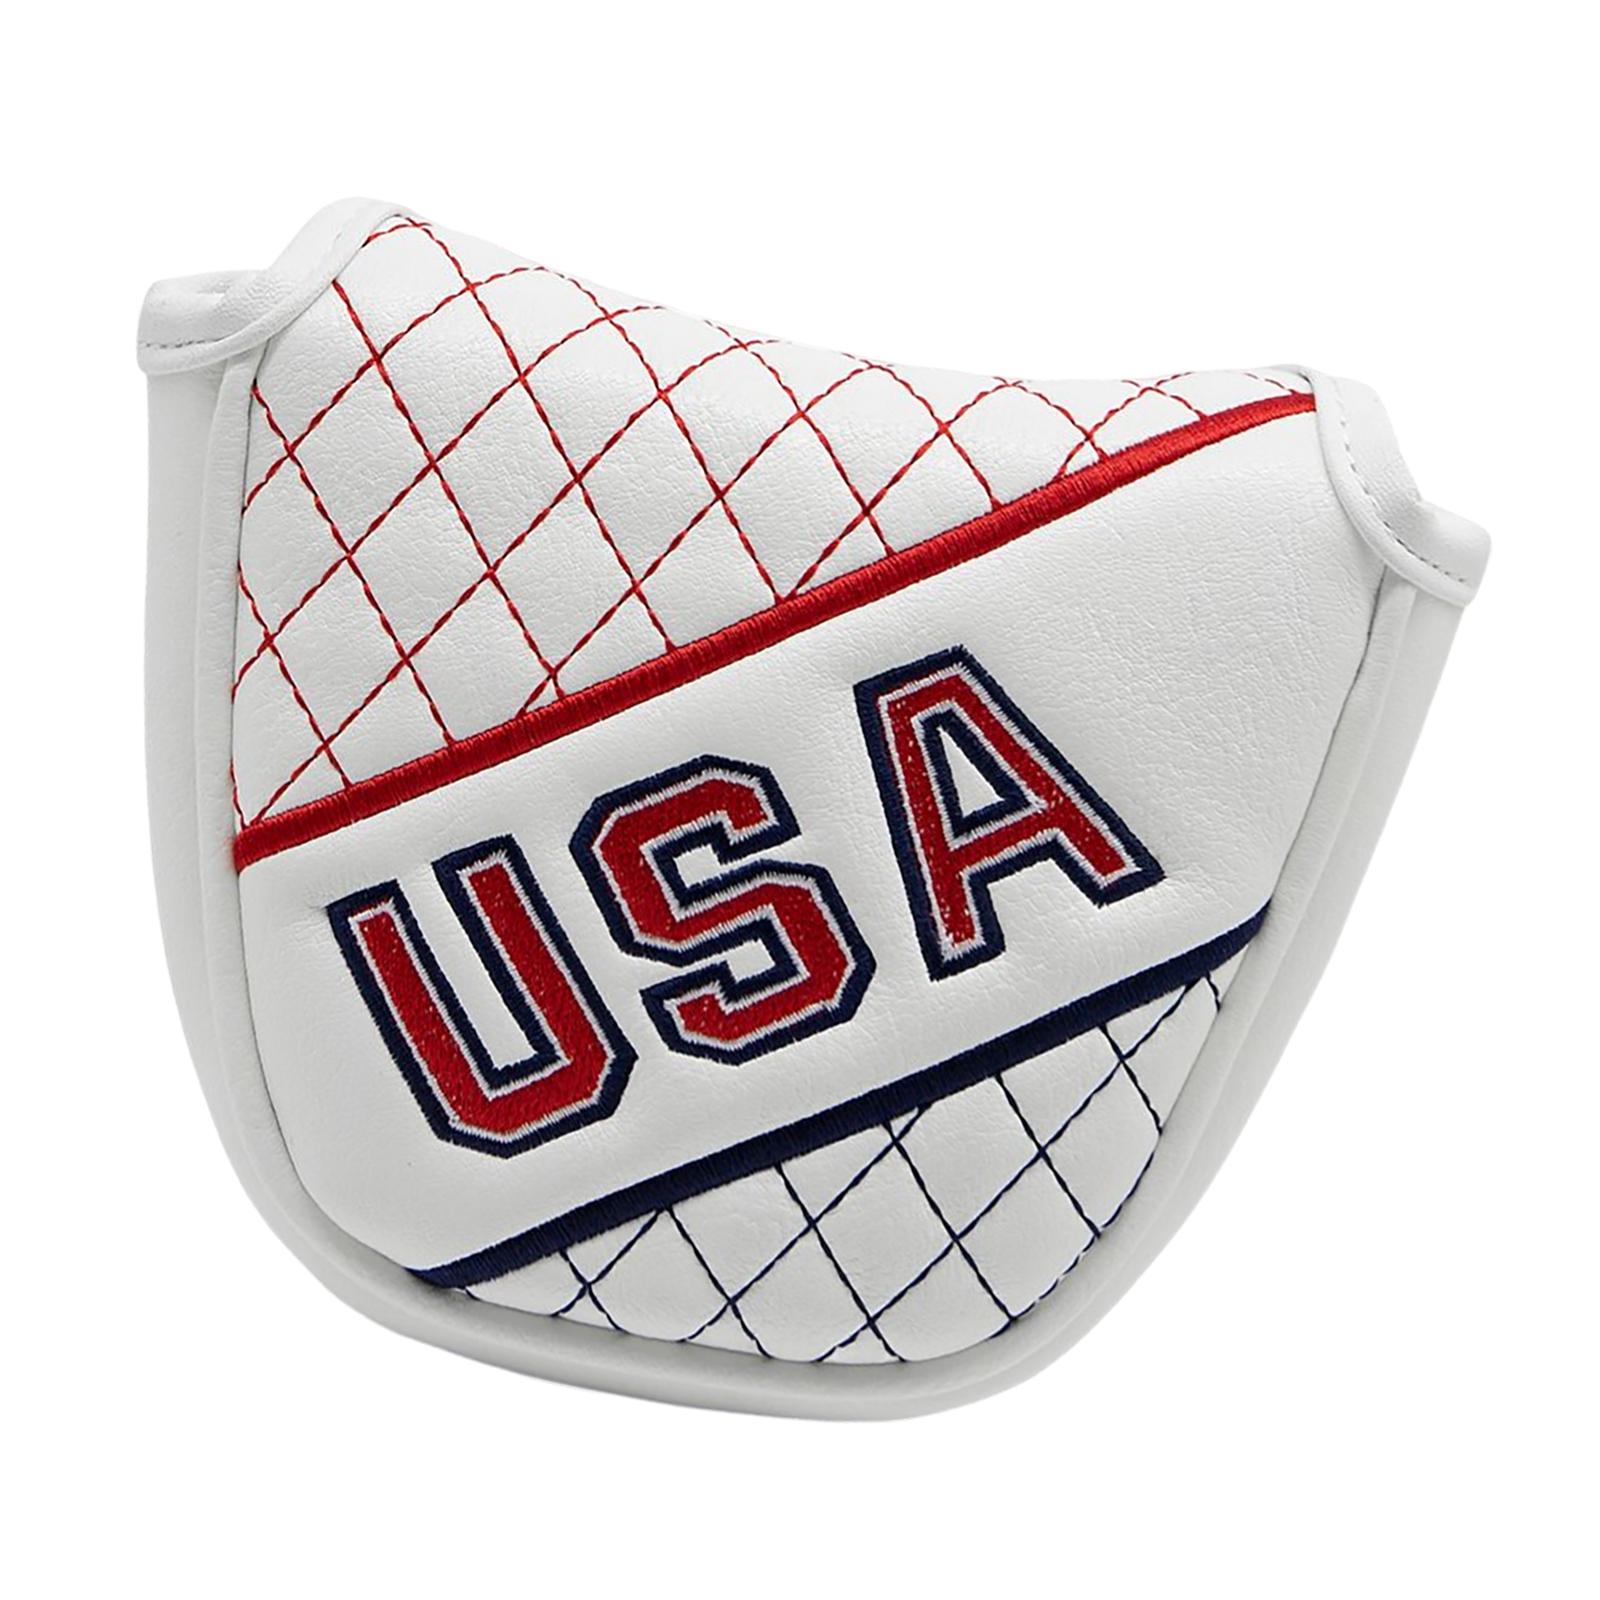 Club Head Covers USA Fashion Premium Lightweight for Sports Travel Men Women For Putter